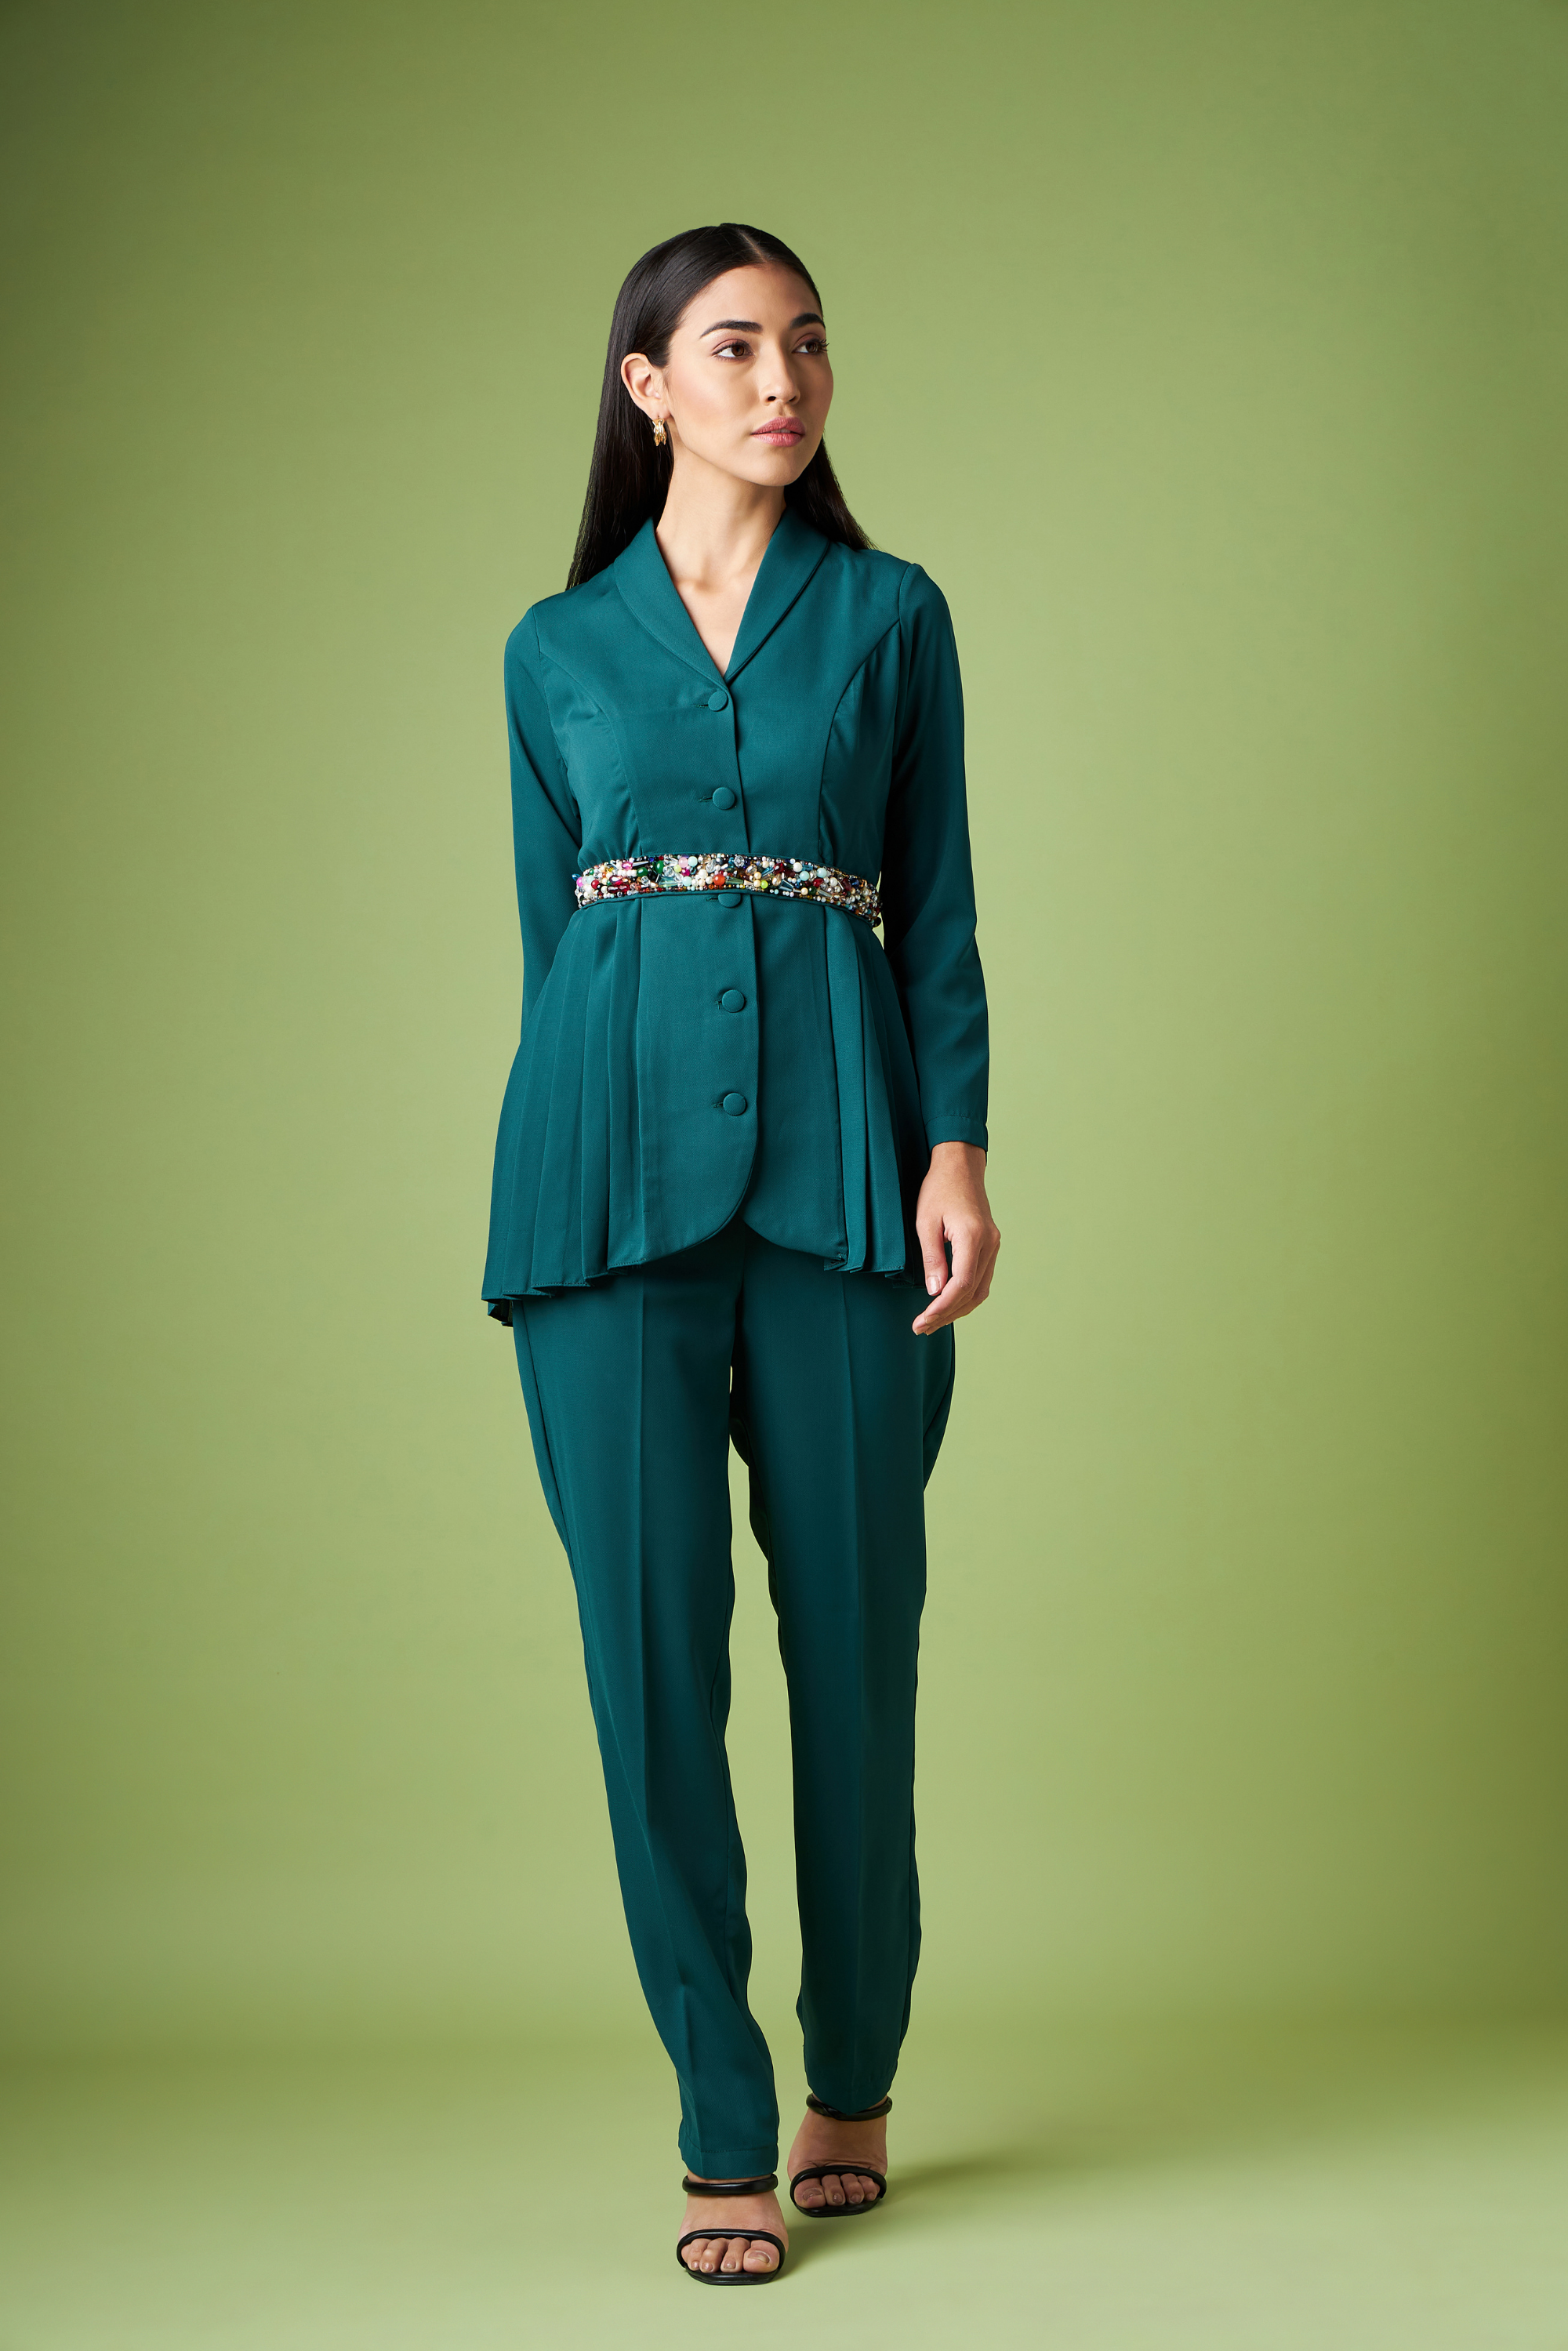 Pleated Blazer Pant Suit With Crystal Belt